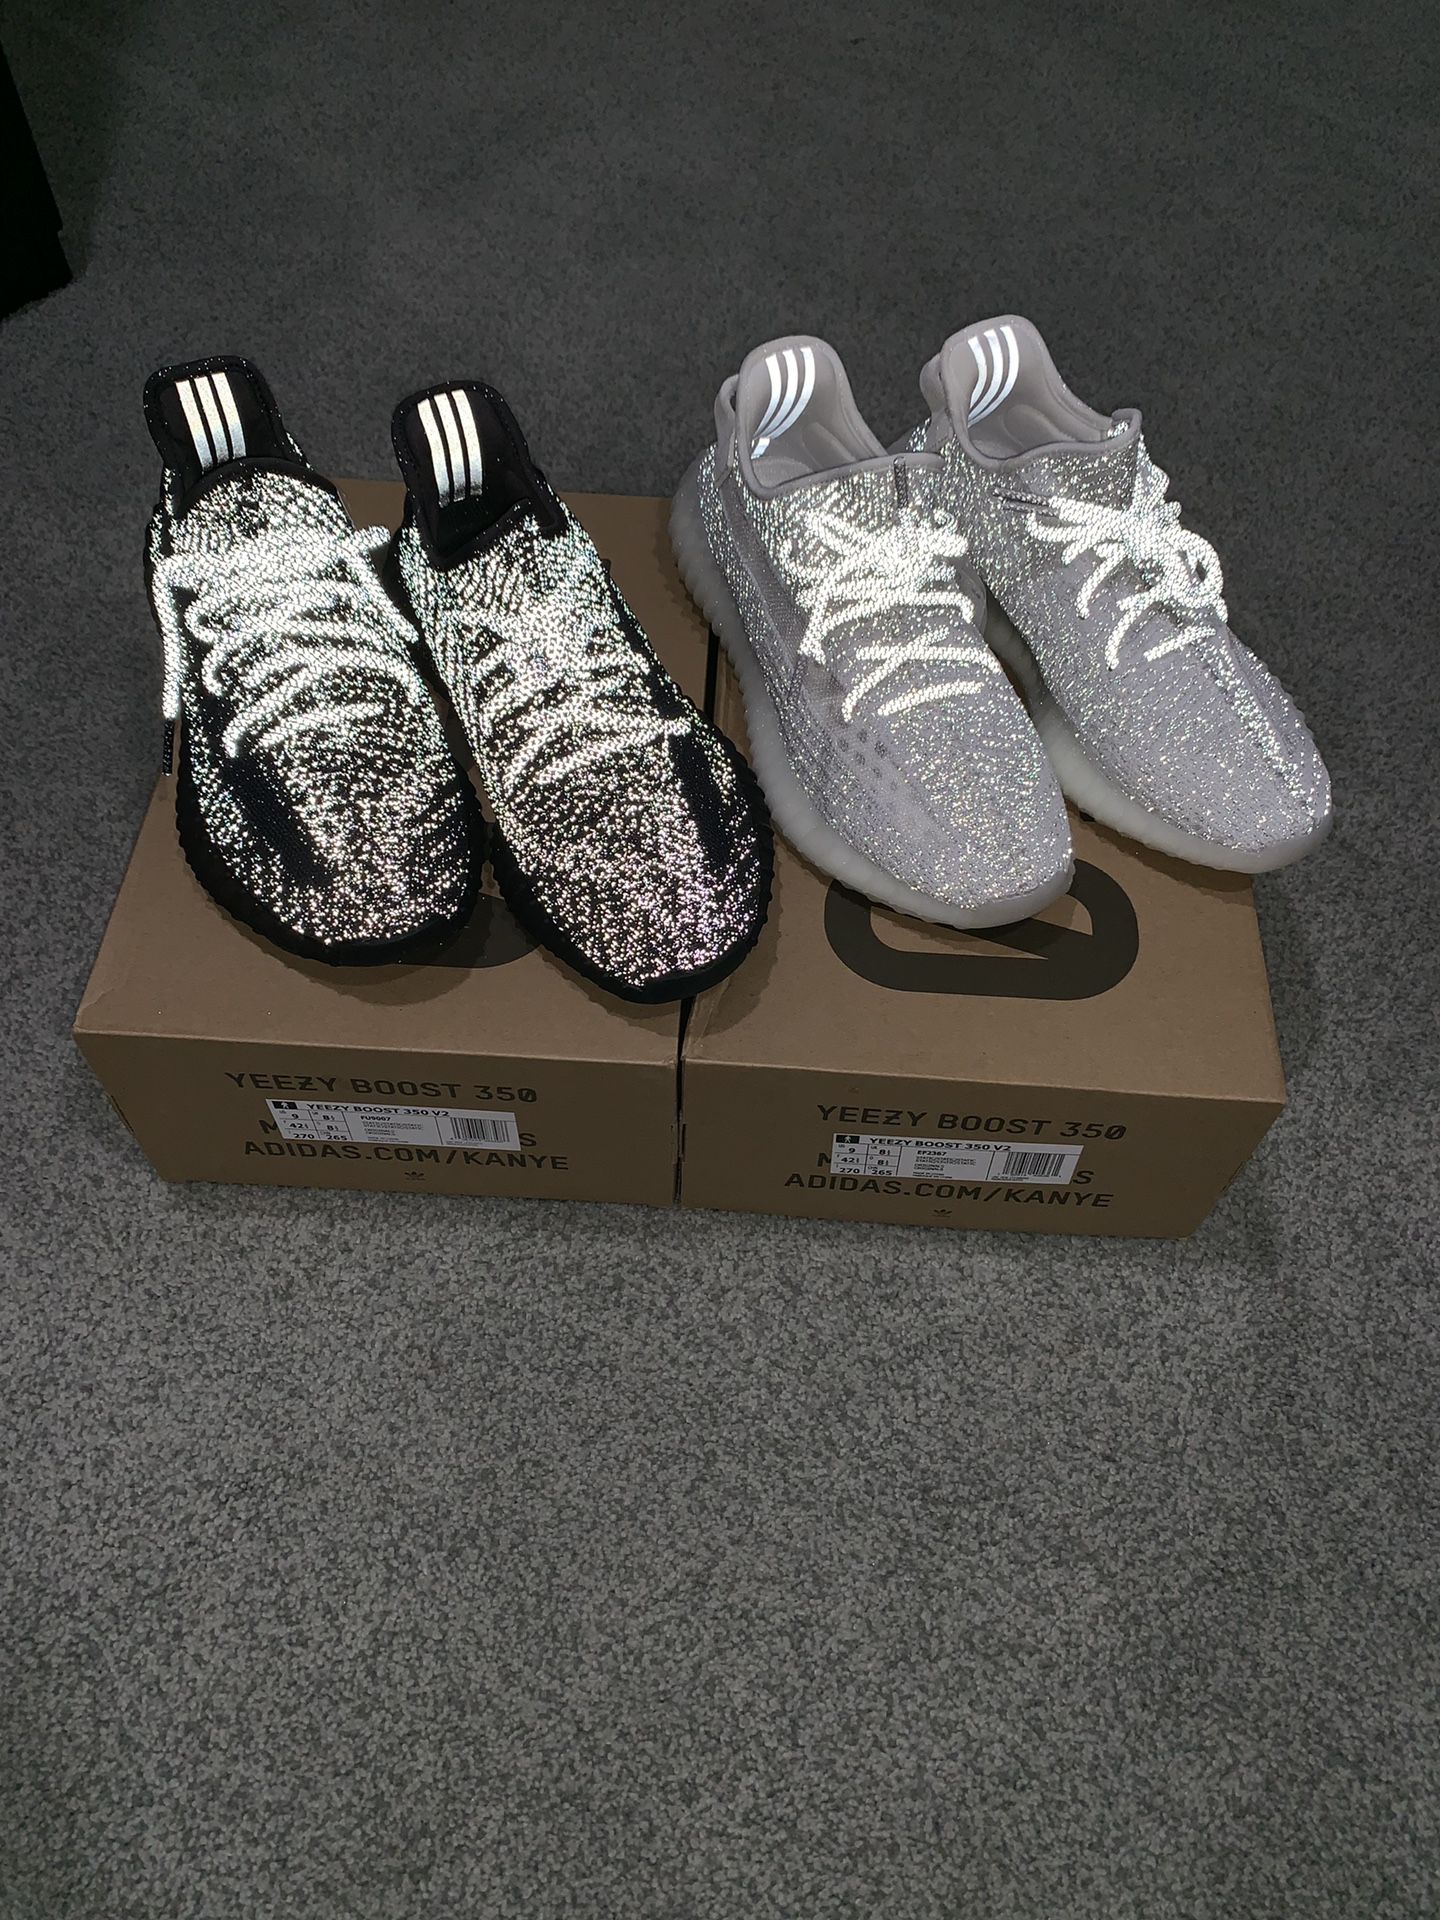 Adidas yeezy 350 v2 static black reflective and static reflective (white) ... ( Gucci Nike Versace )